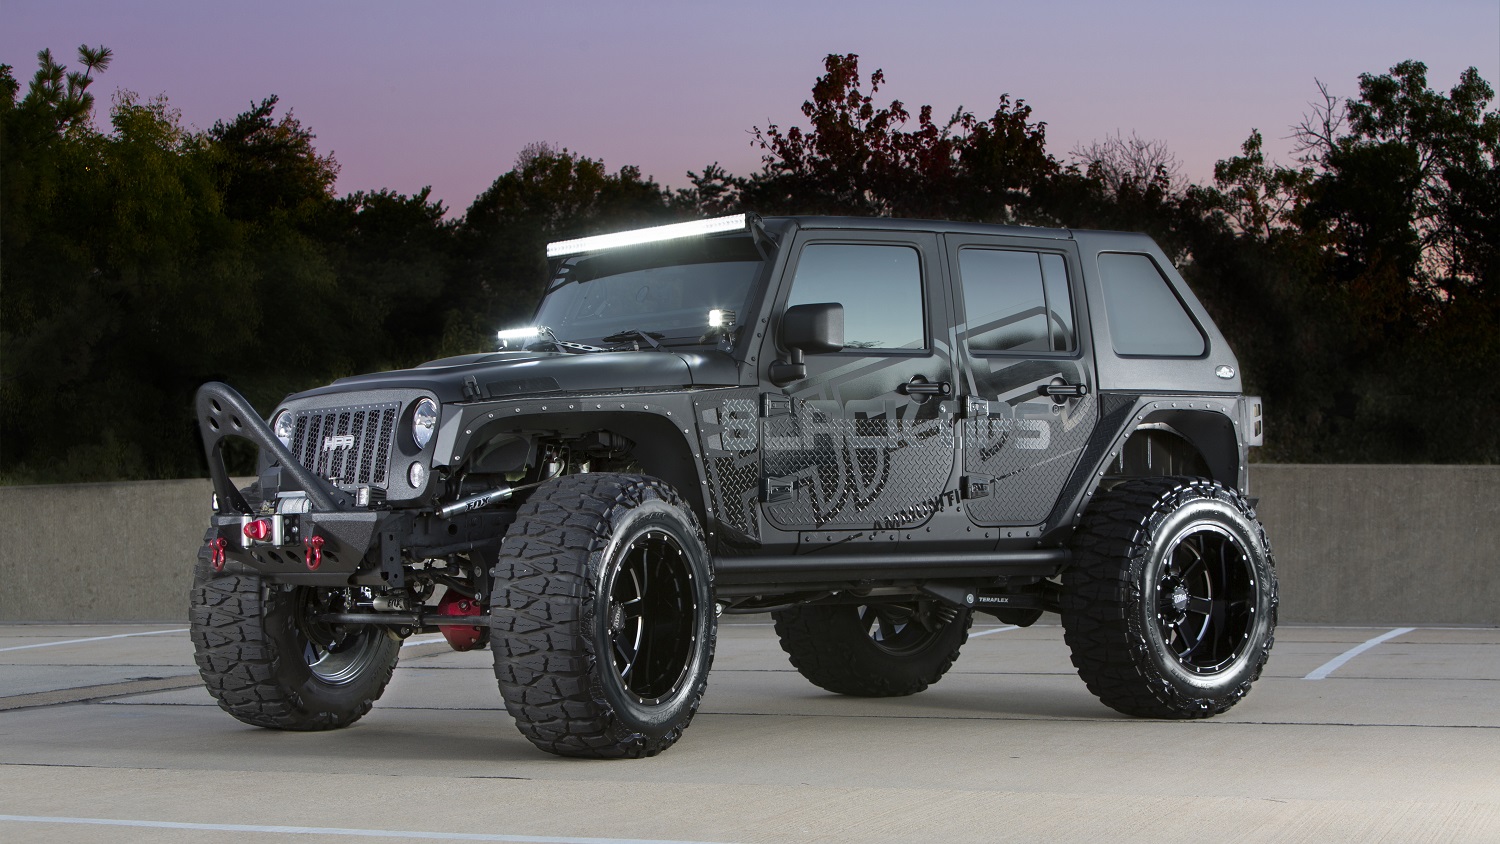 This Black Ops Jeep Wrangler Could be Yours!